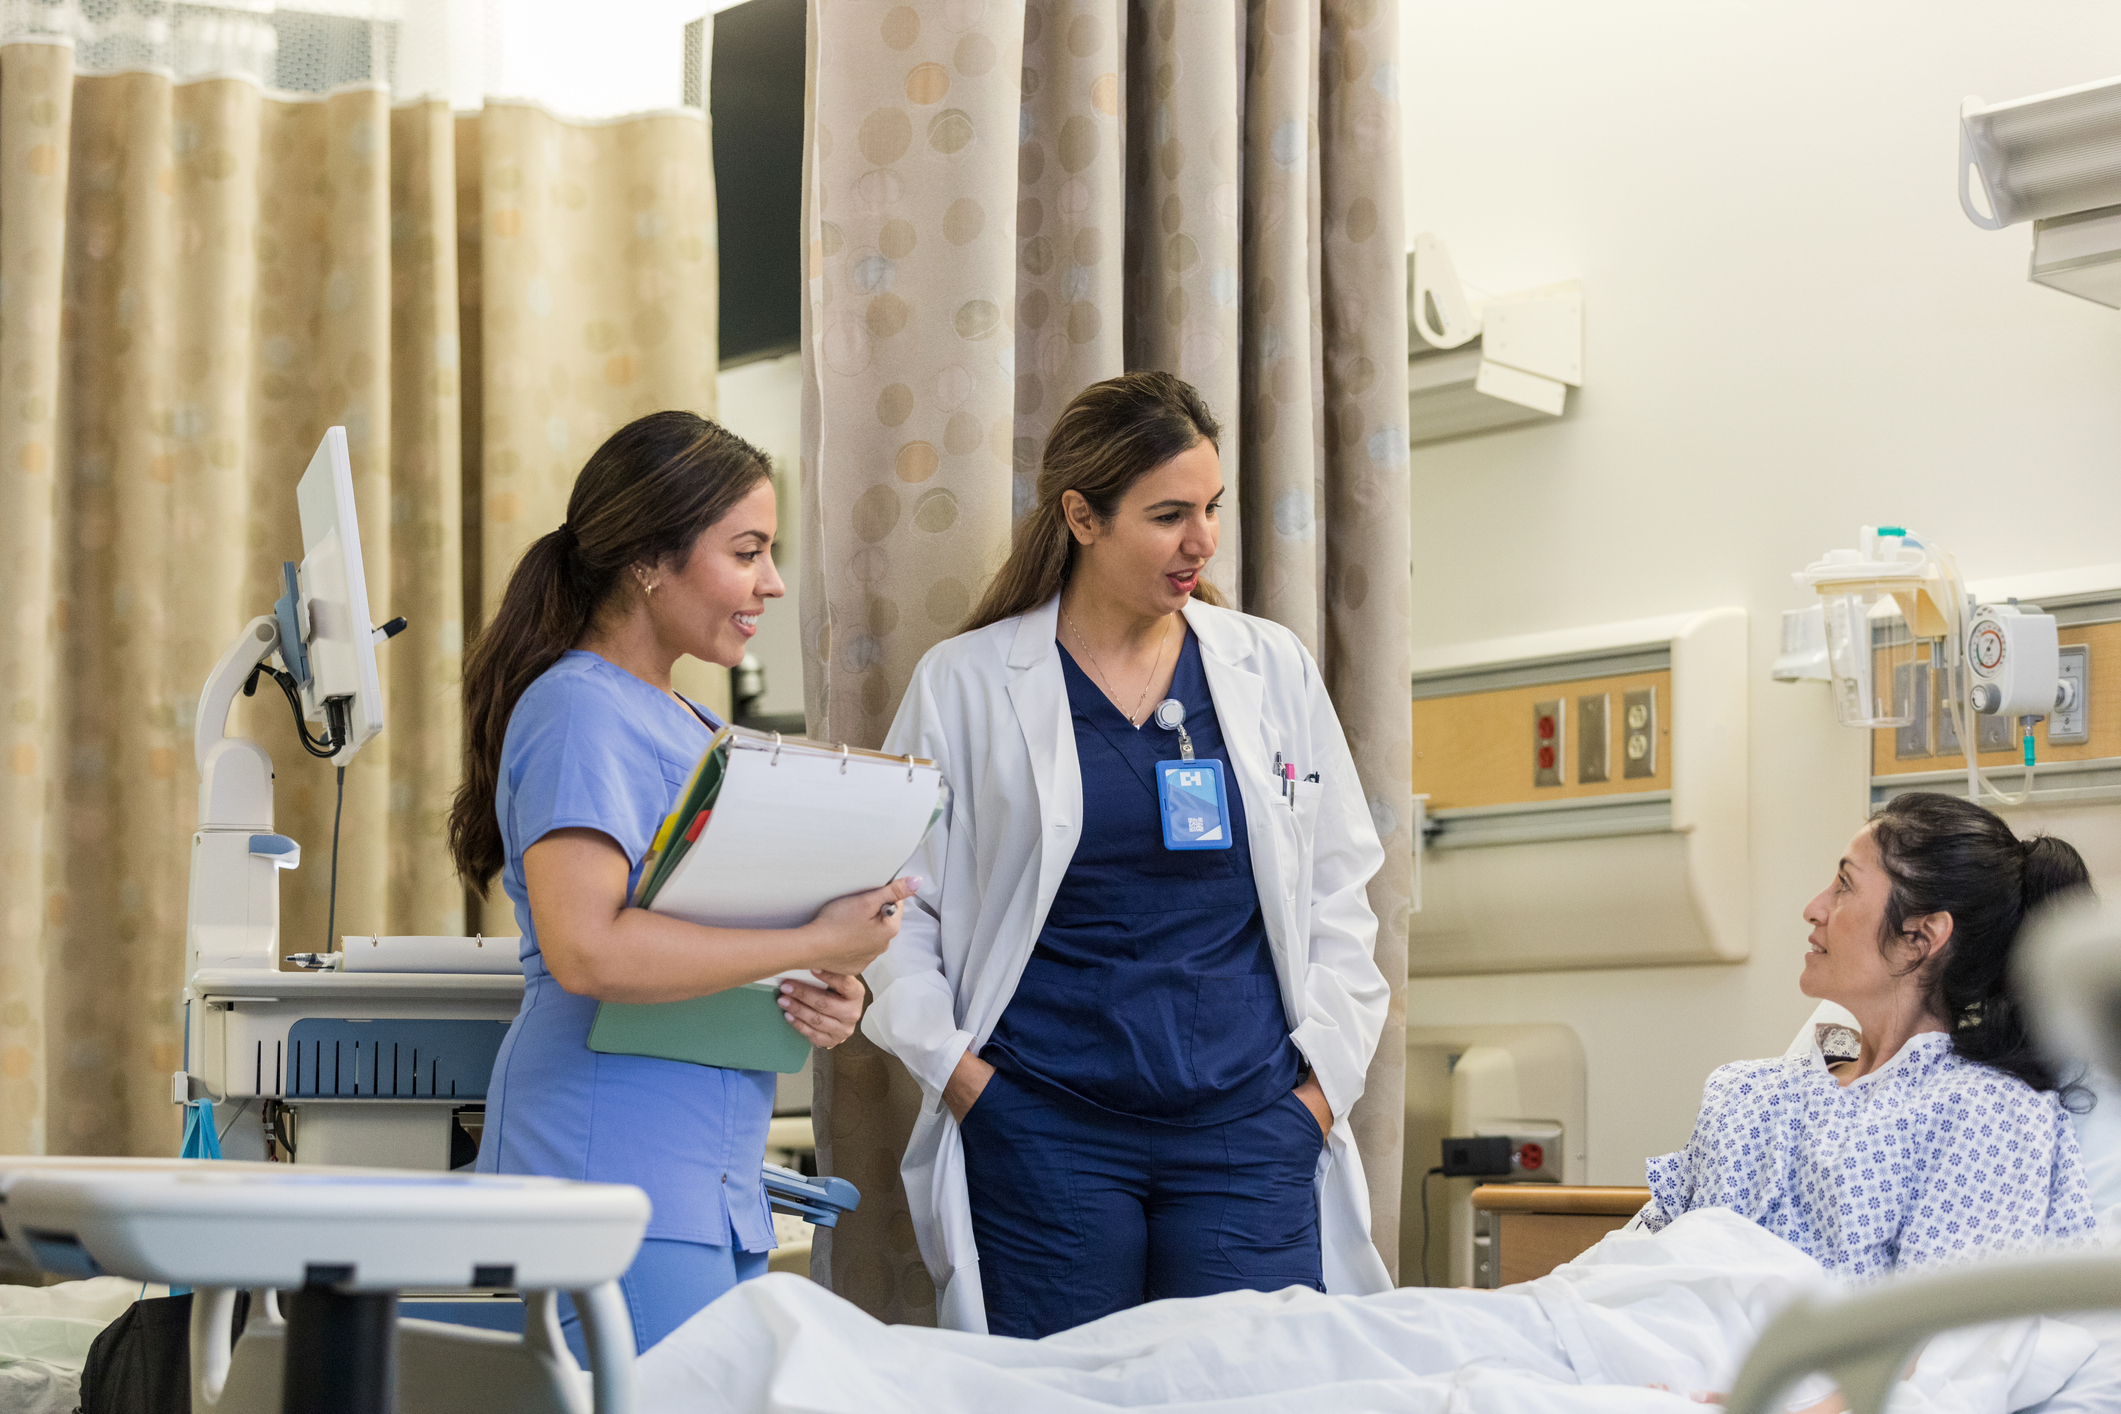 ER nurse and doctor talking to patient